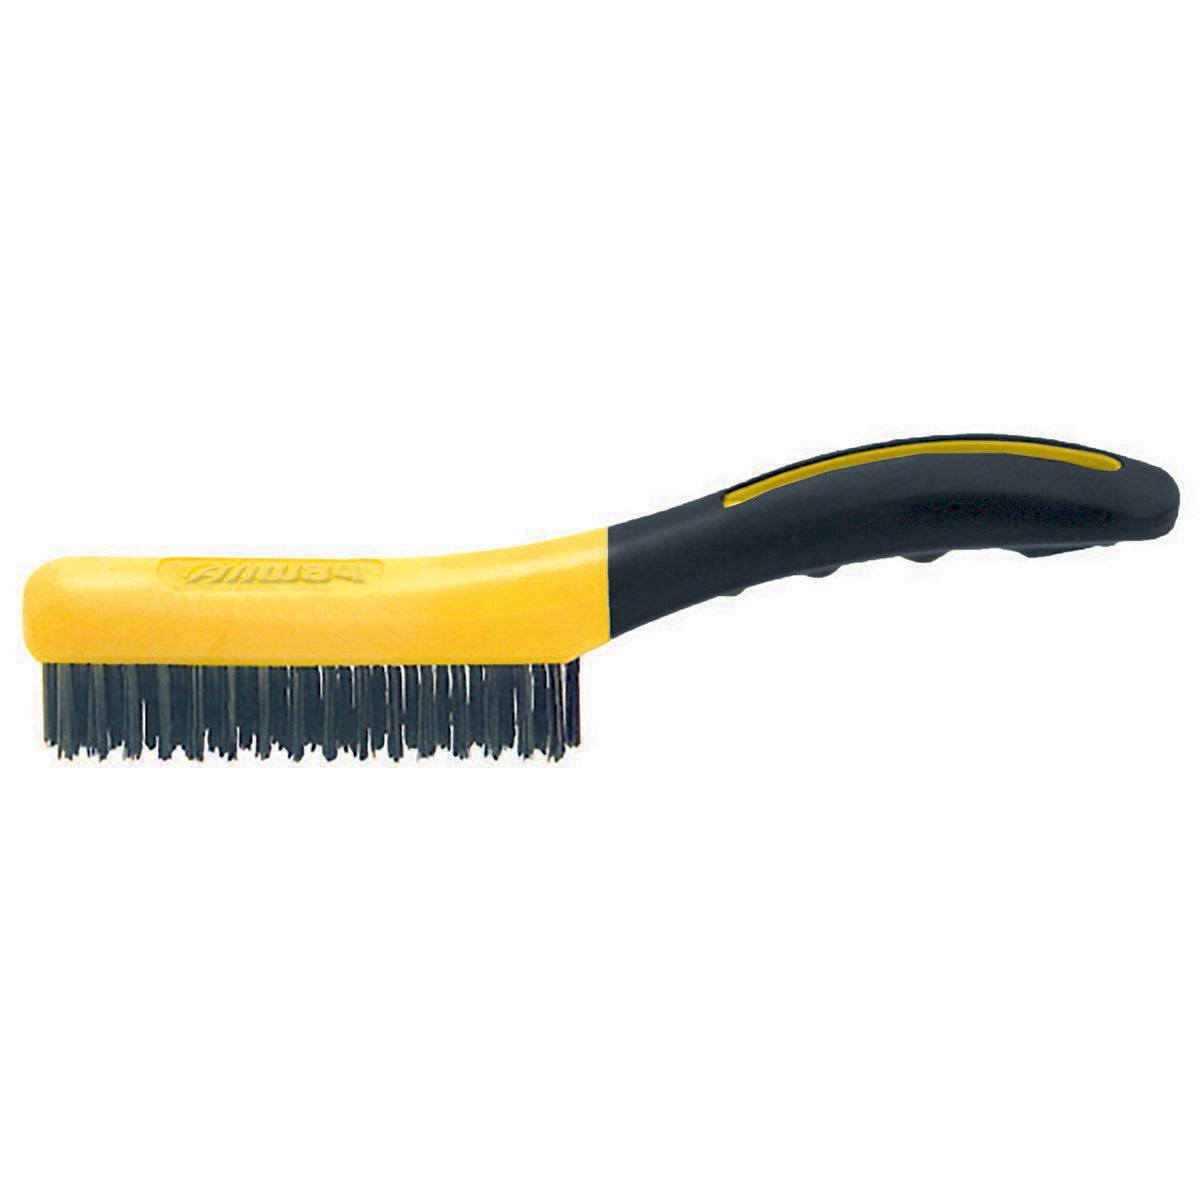 Sheffield Tools 58802 Shoe Handle Wire Brush